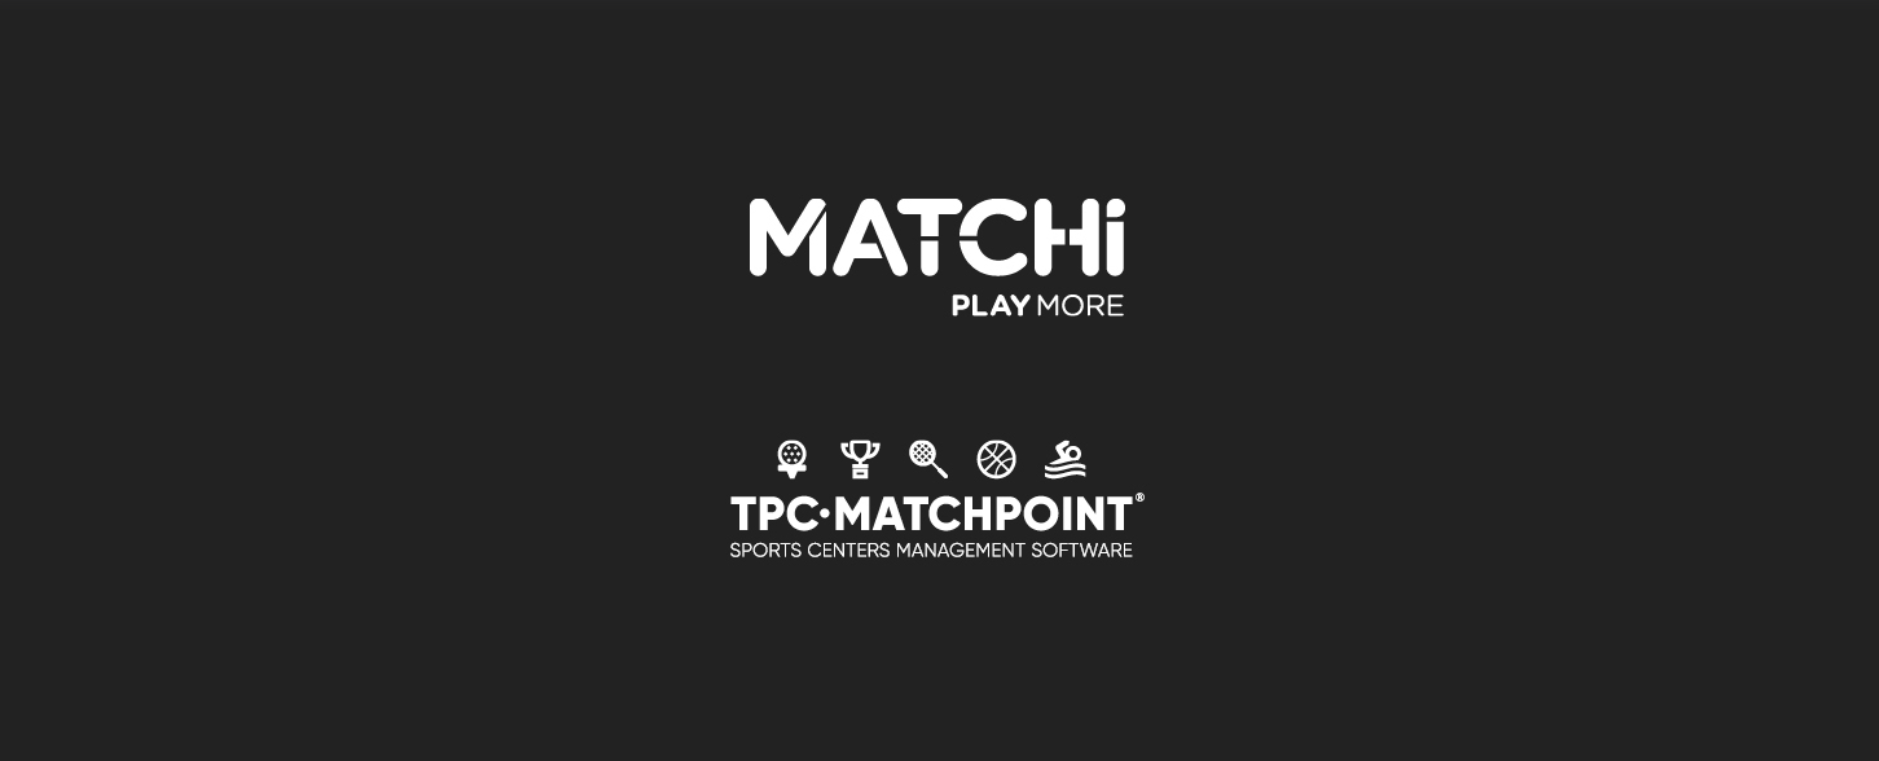 TPC Matchpoint partners with MATCHi, creating one of the largest racquet sports networks in the world!